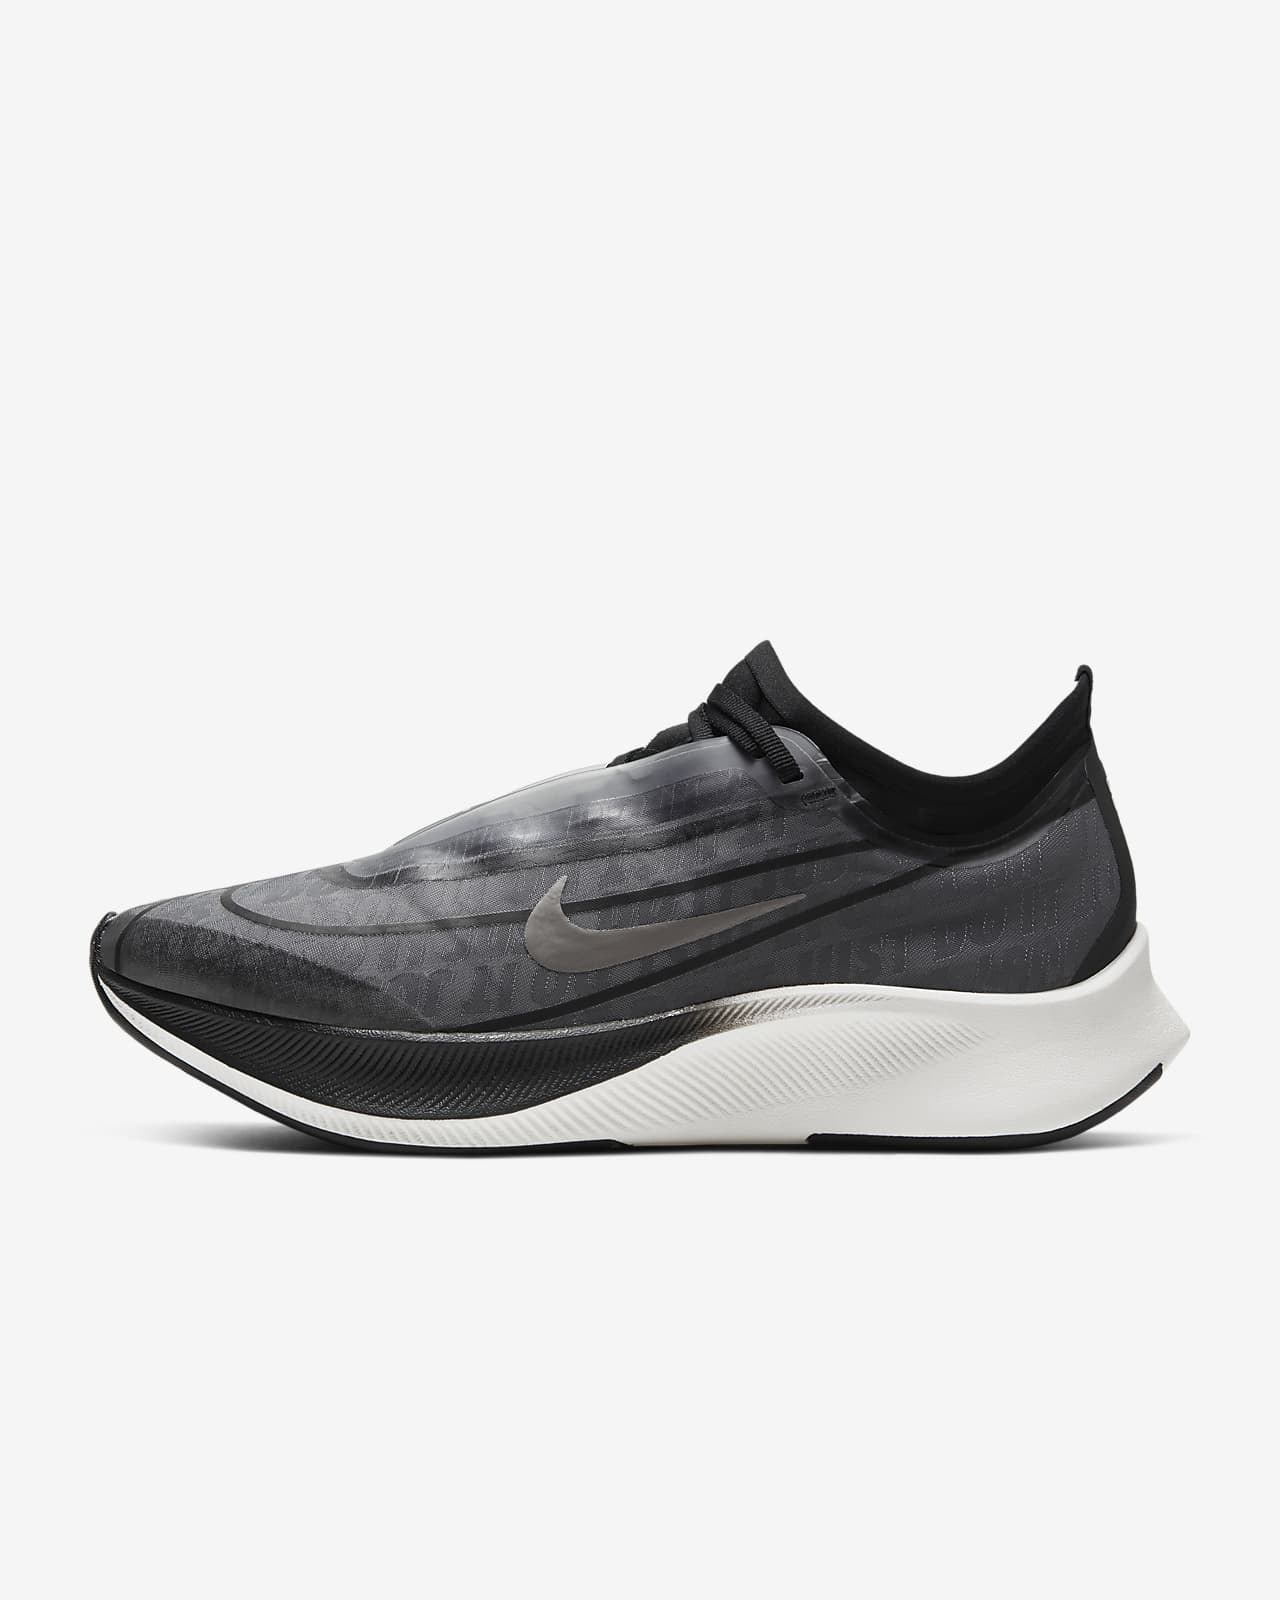 Nike Zoom Fly 3 Women's Road Running Shoes اسم رضا